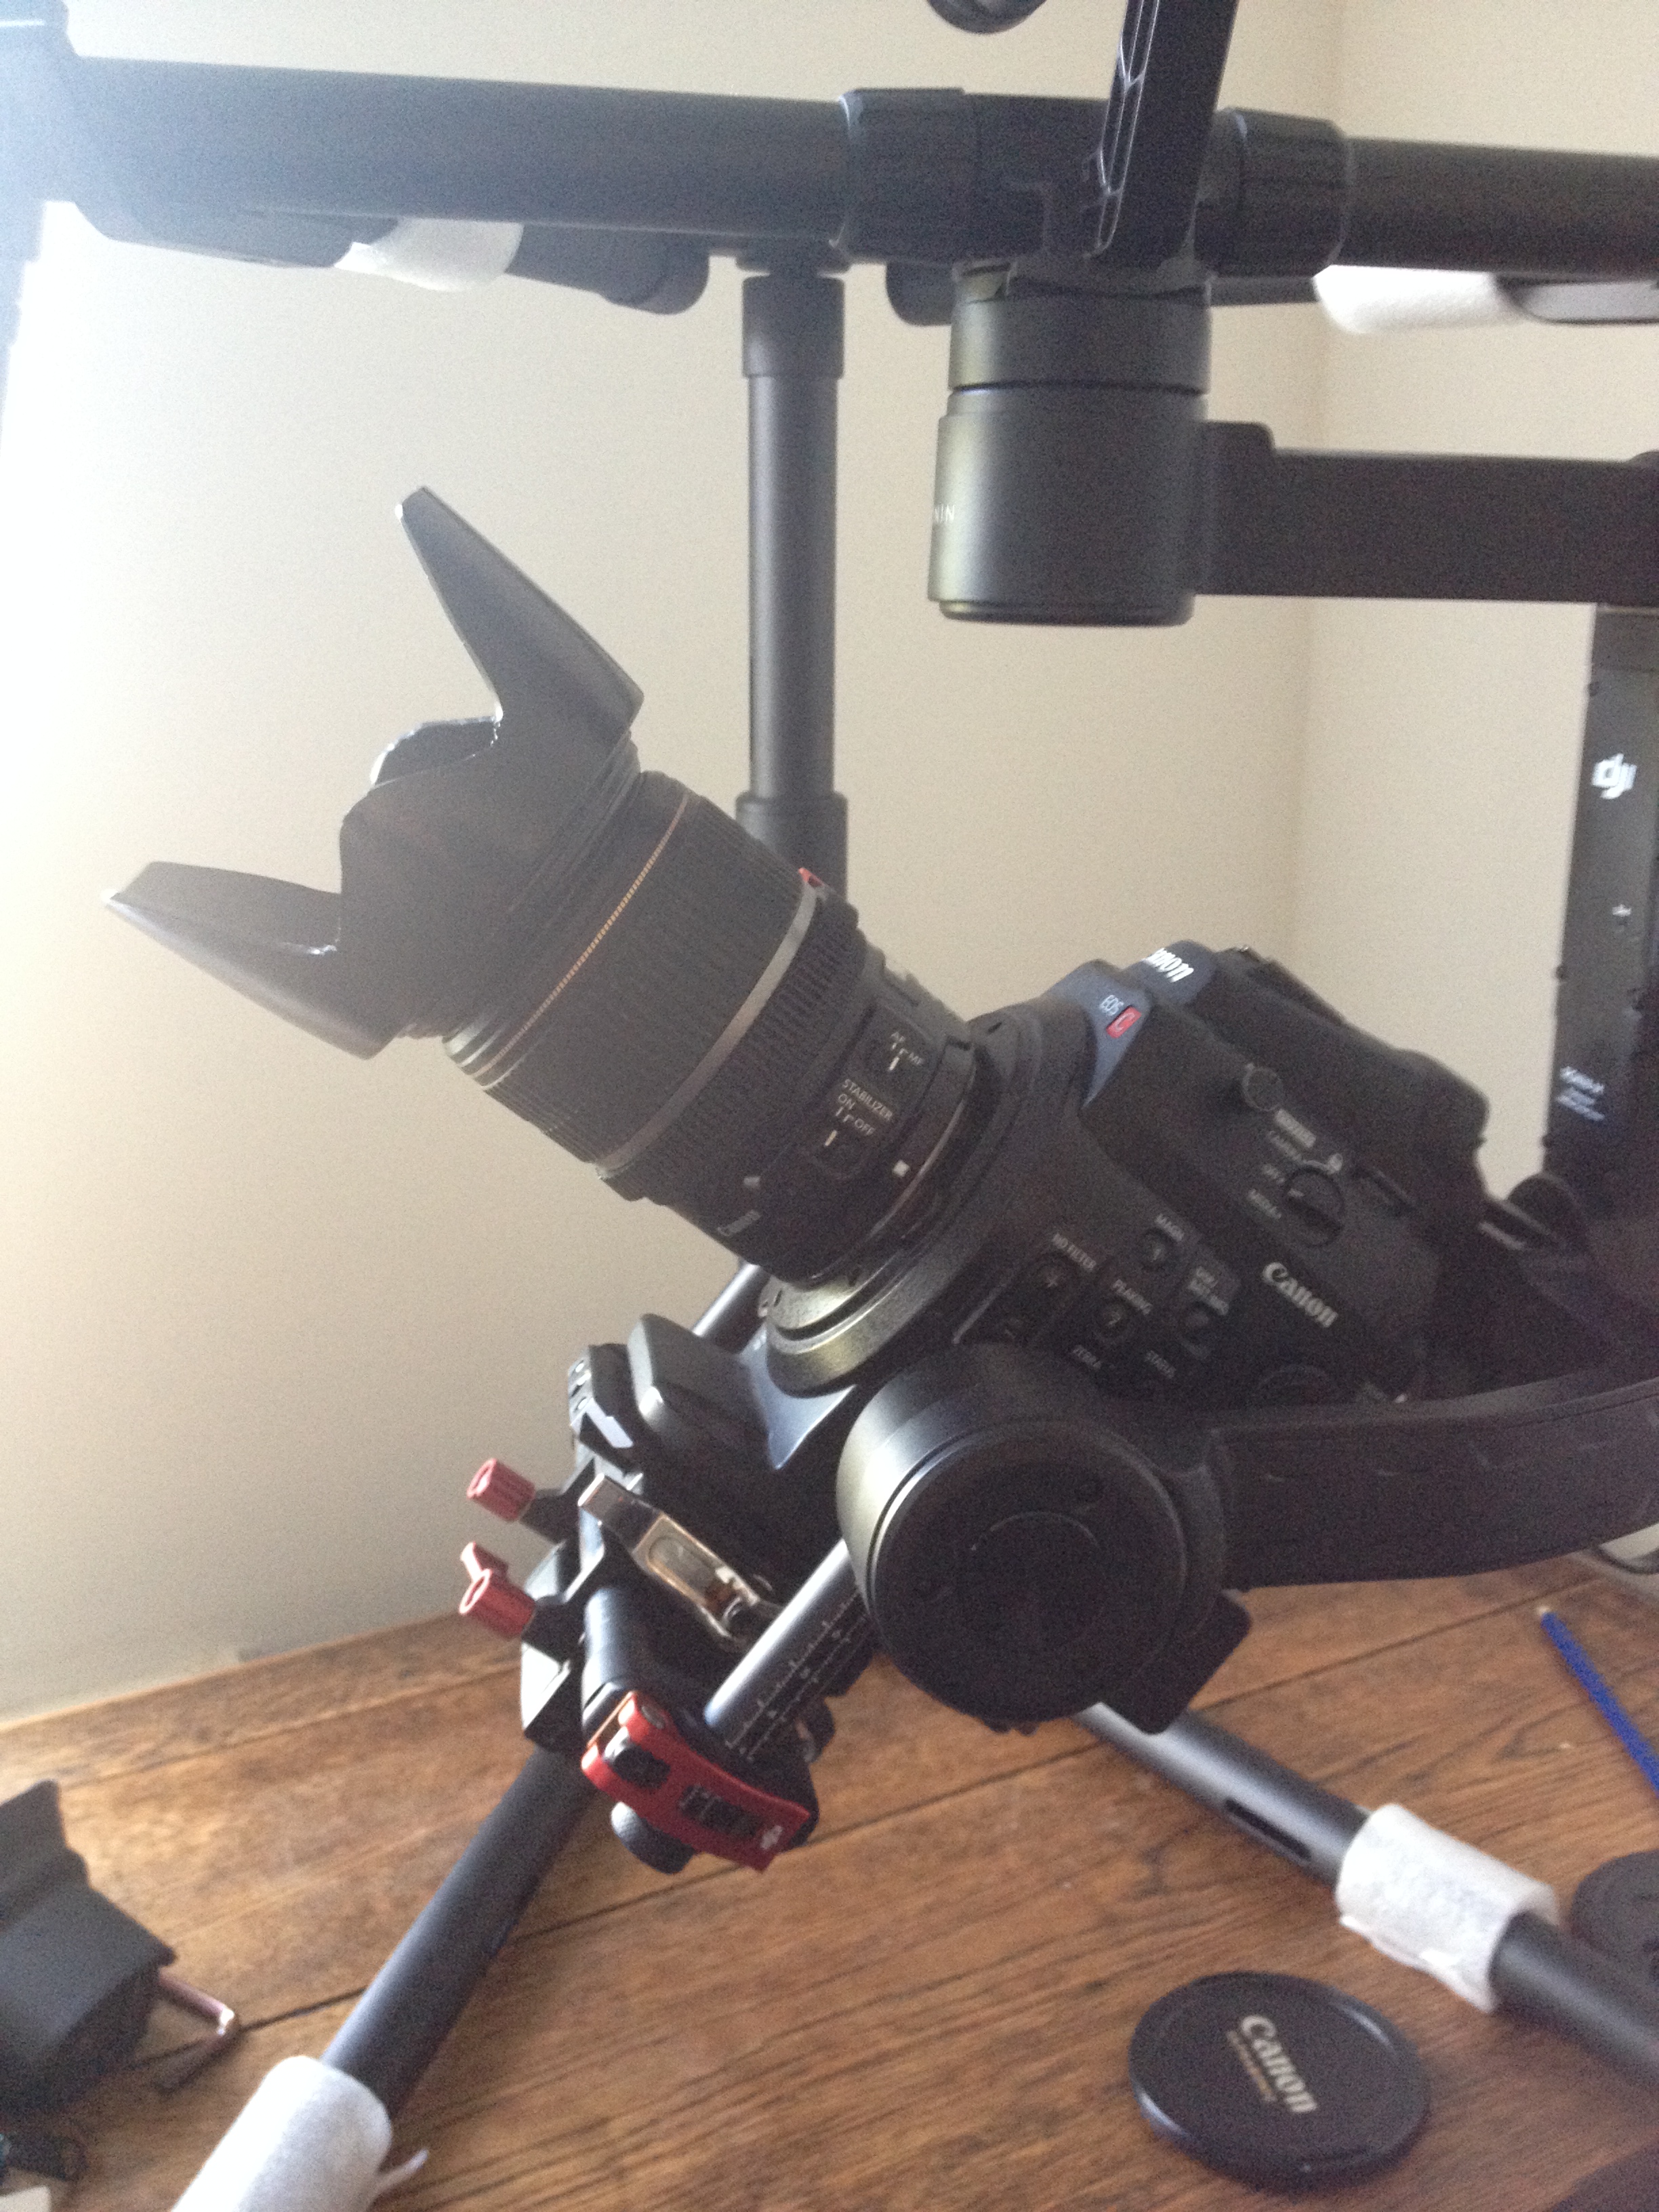 ronin m with canon c300 17-55mm